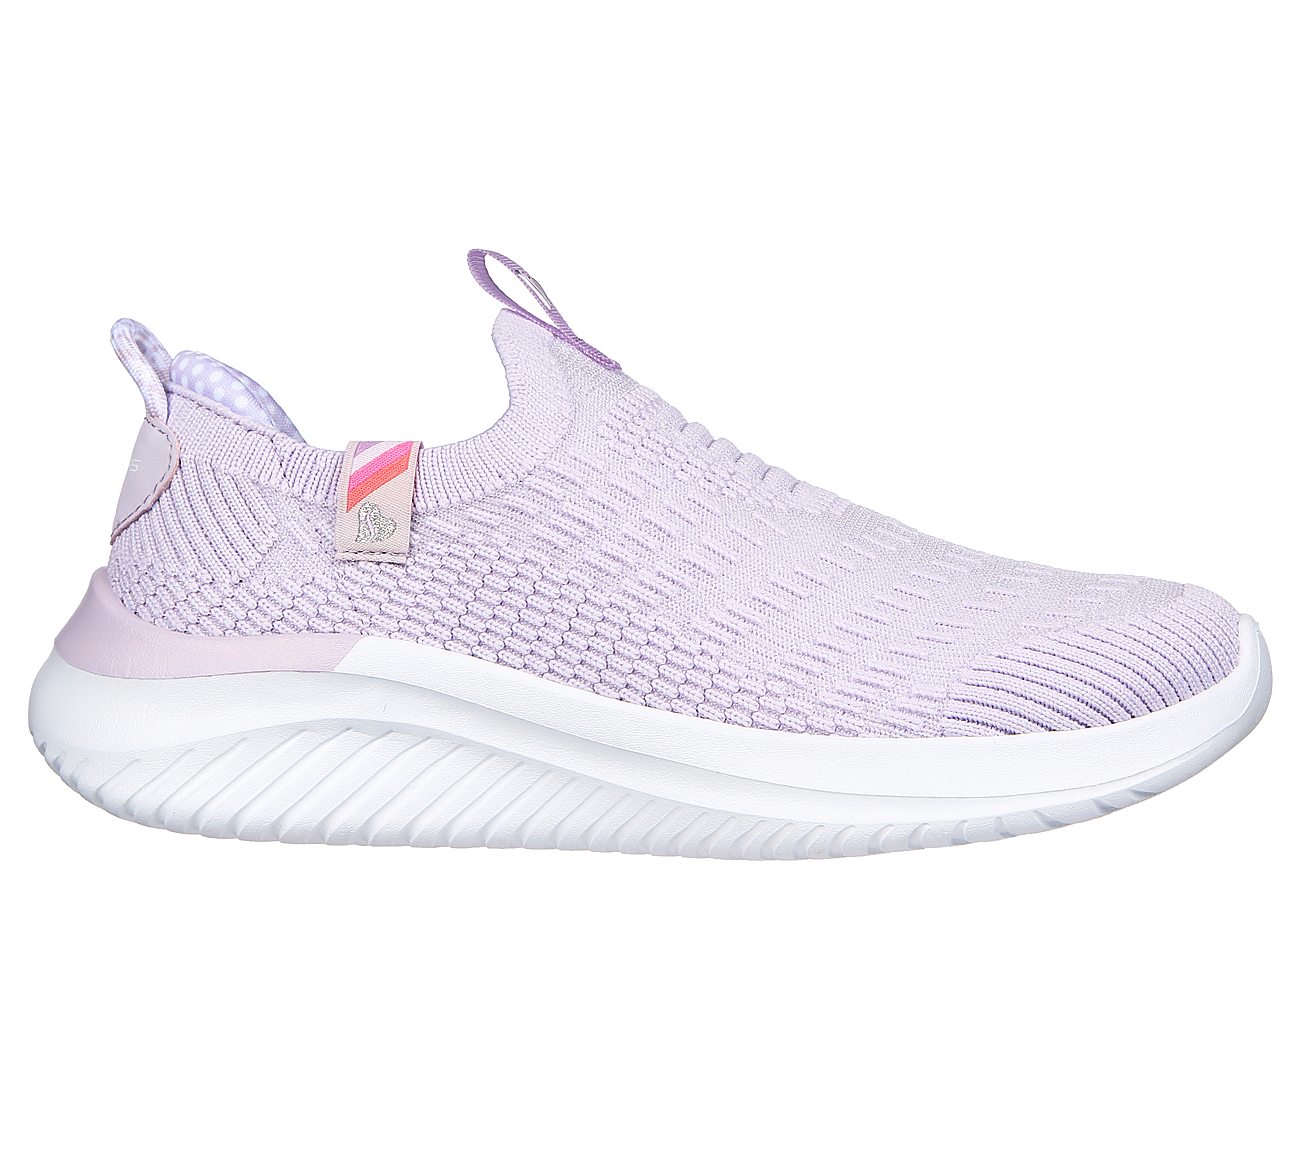 ULTRA FLEX 3.0 - HAPPY BRIGHT, LAVENDER Footwear Lateral View